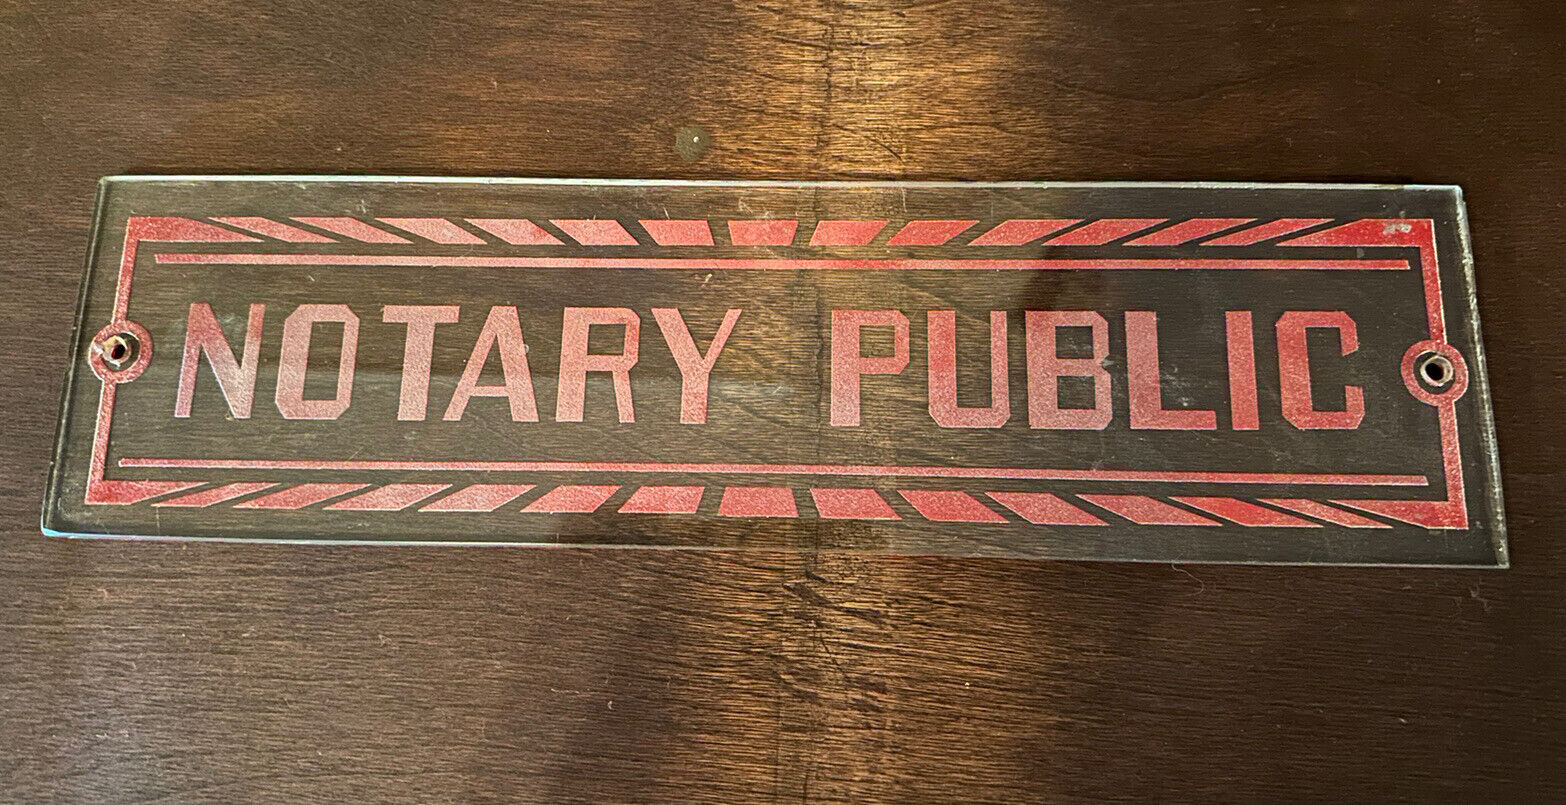 1920s Public Notary Bar Cafe Diner Advertising Glass Sign Smaltz Rare trade Law